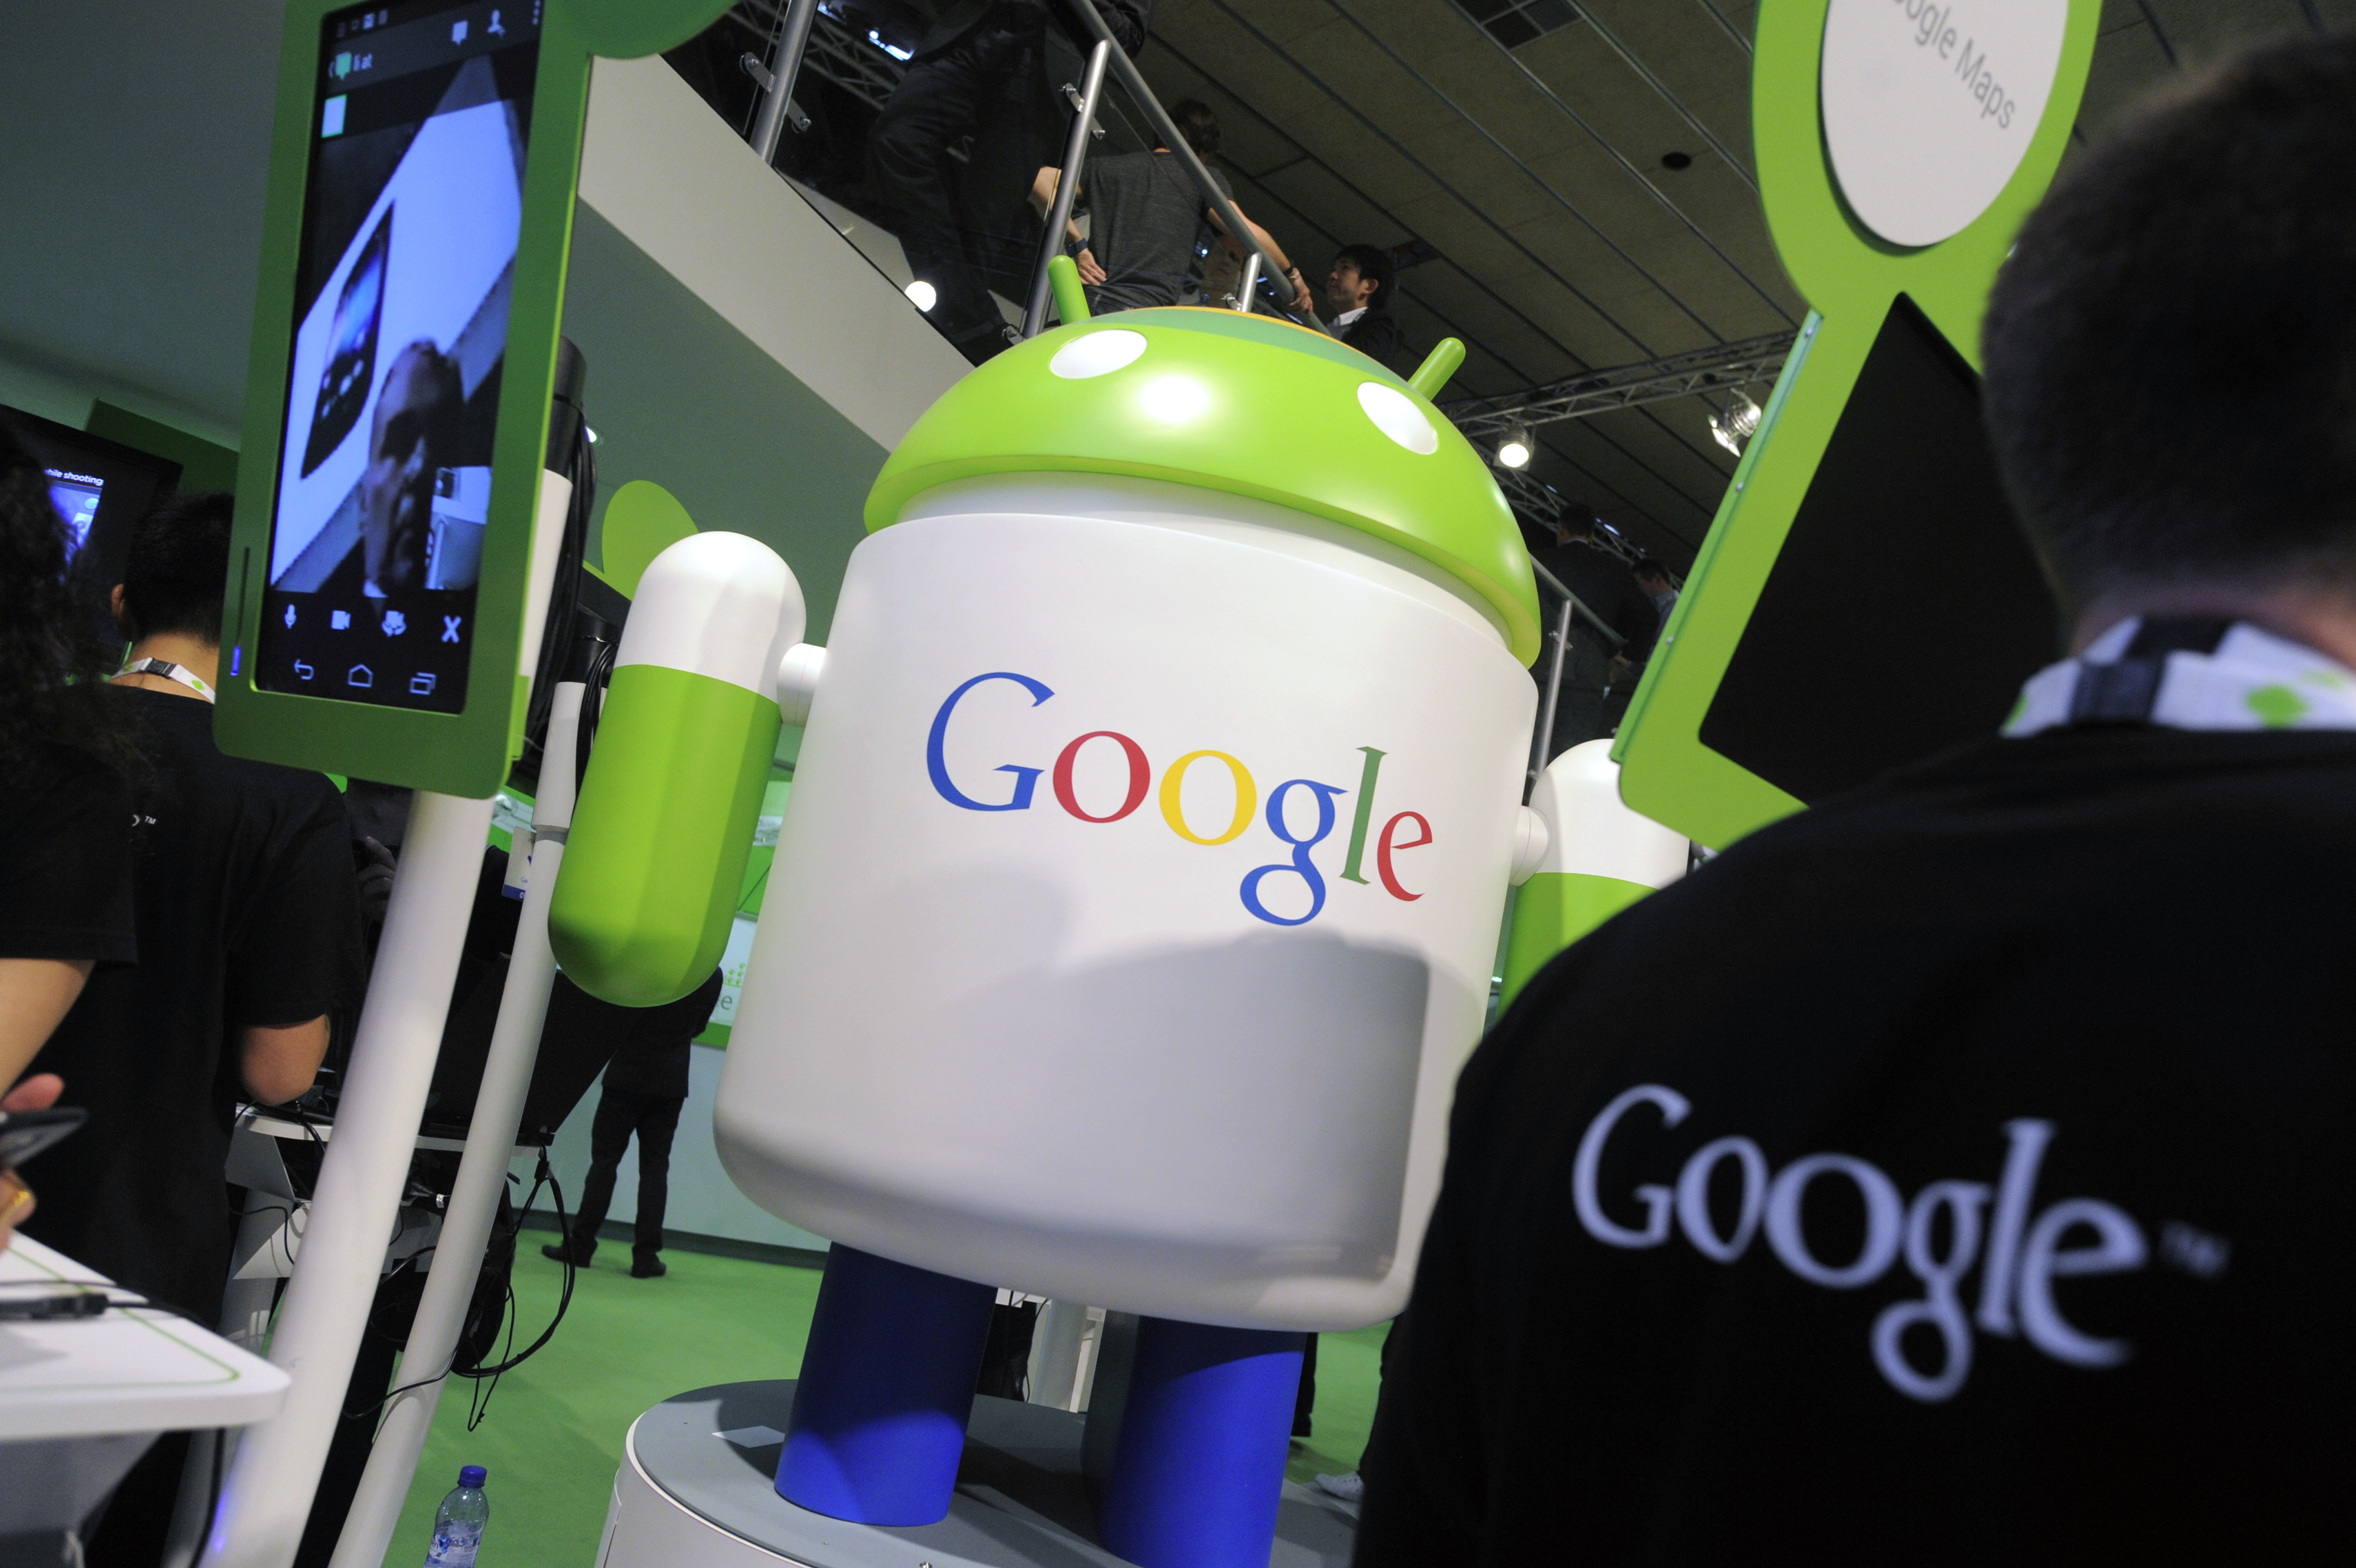 An Android operating software icon sits on display with a Google Inc. logo at the Google booth at the Mobile World Congress in Barcelona, Spain, on Wednesday, Feb. 29, 2012. (Bloomberg /Getty Images)